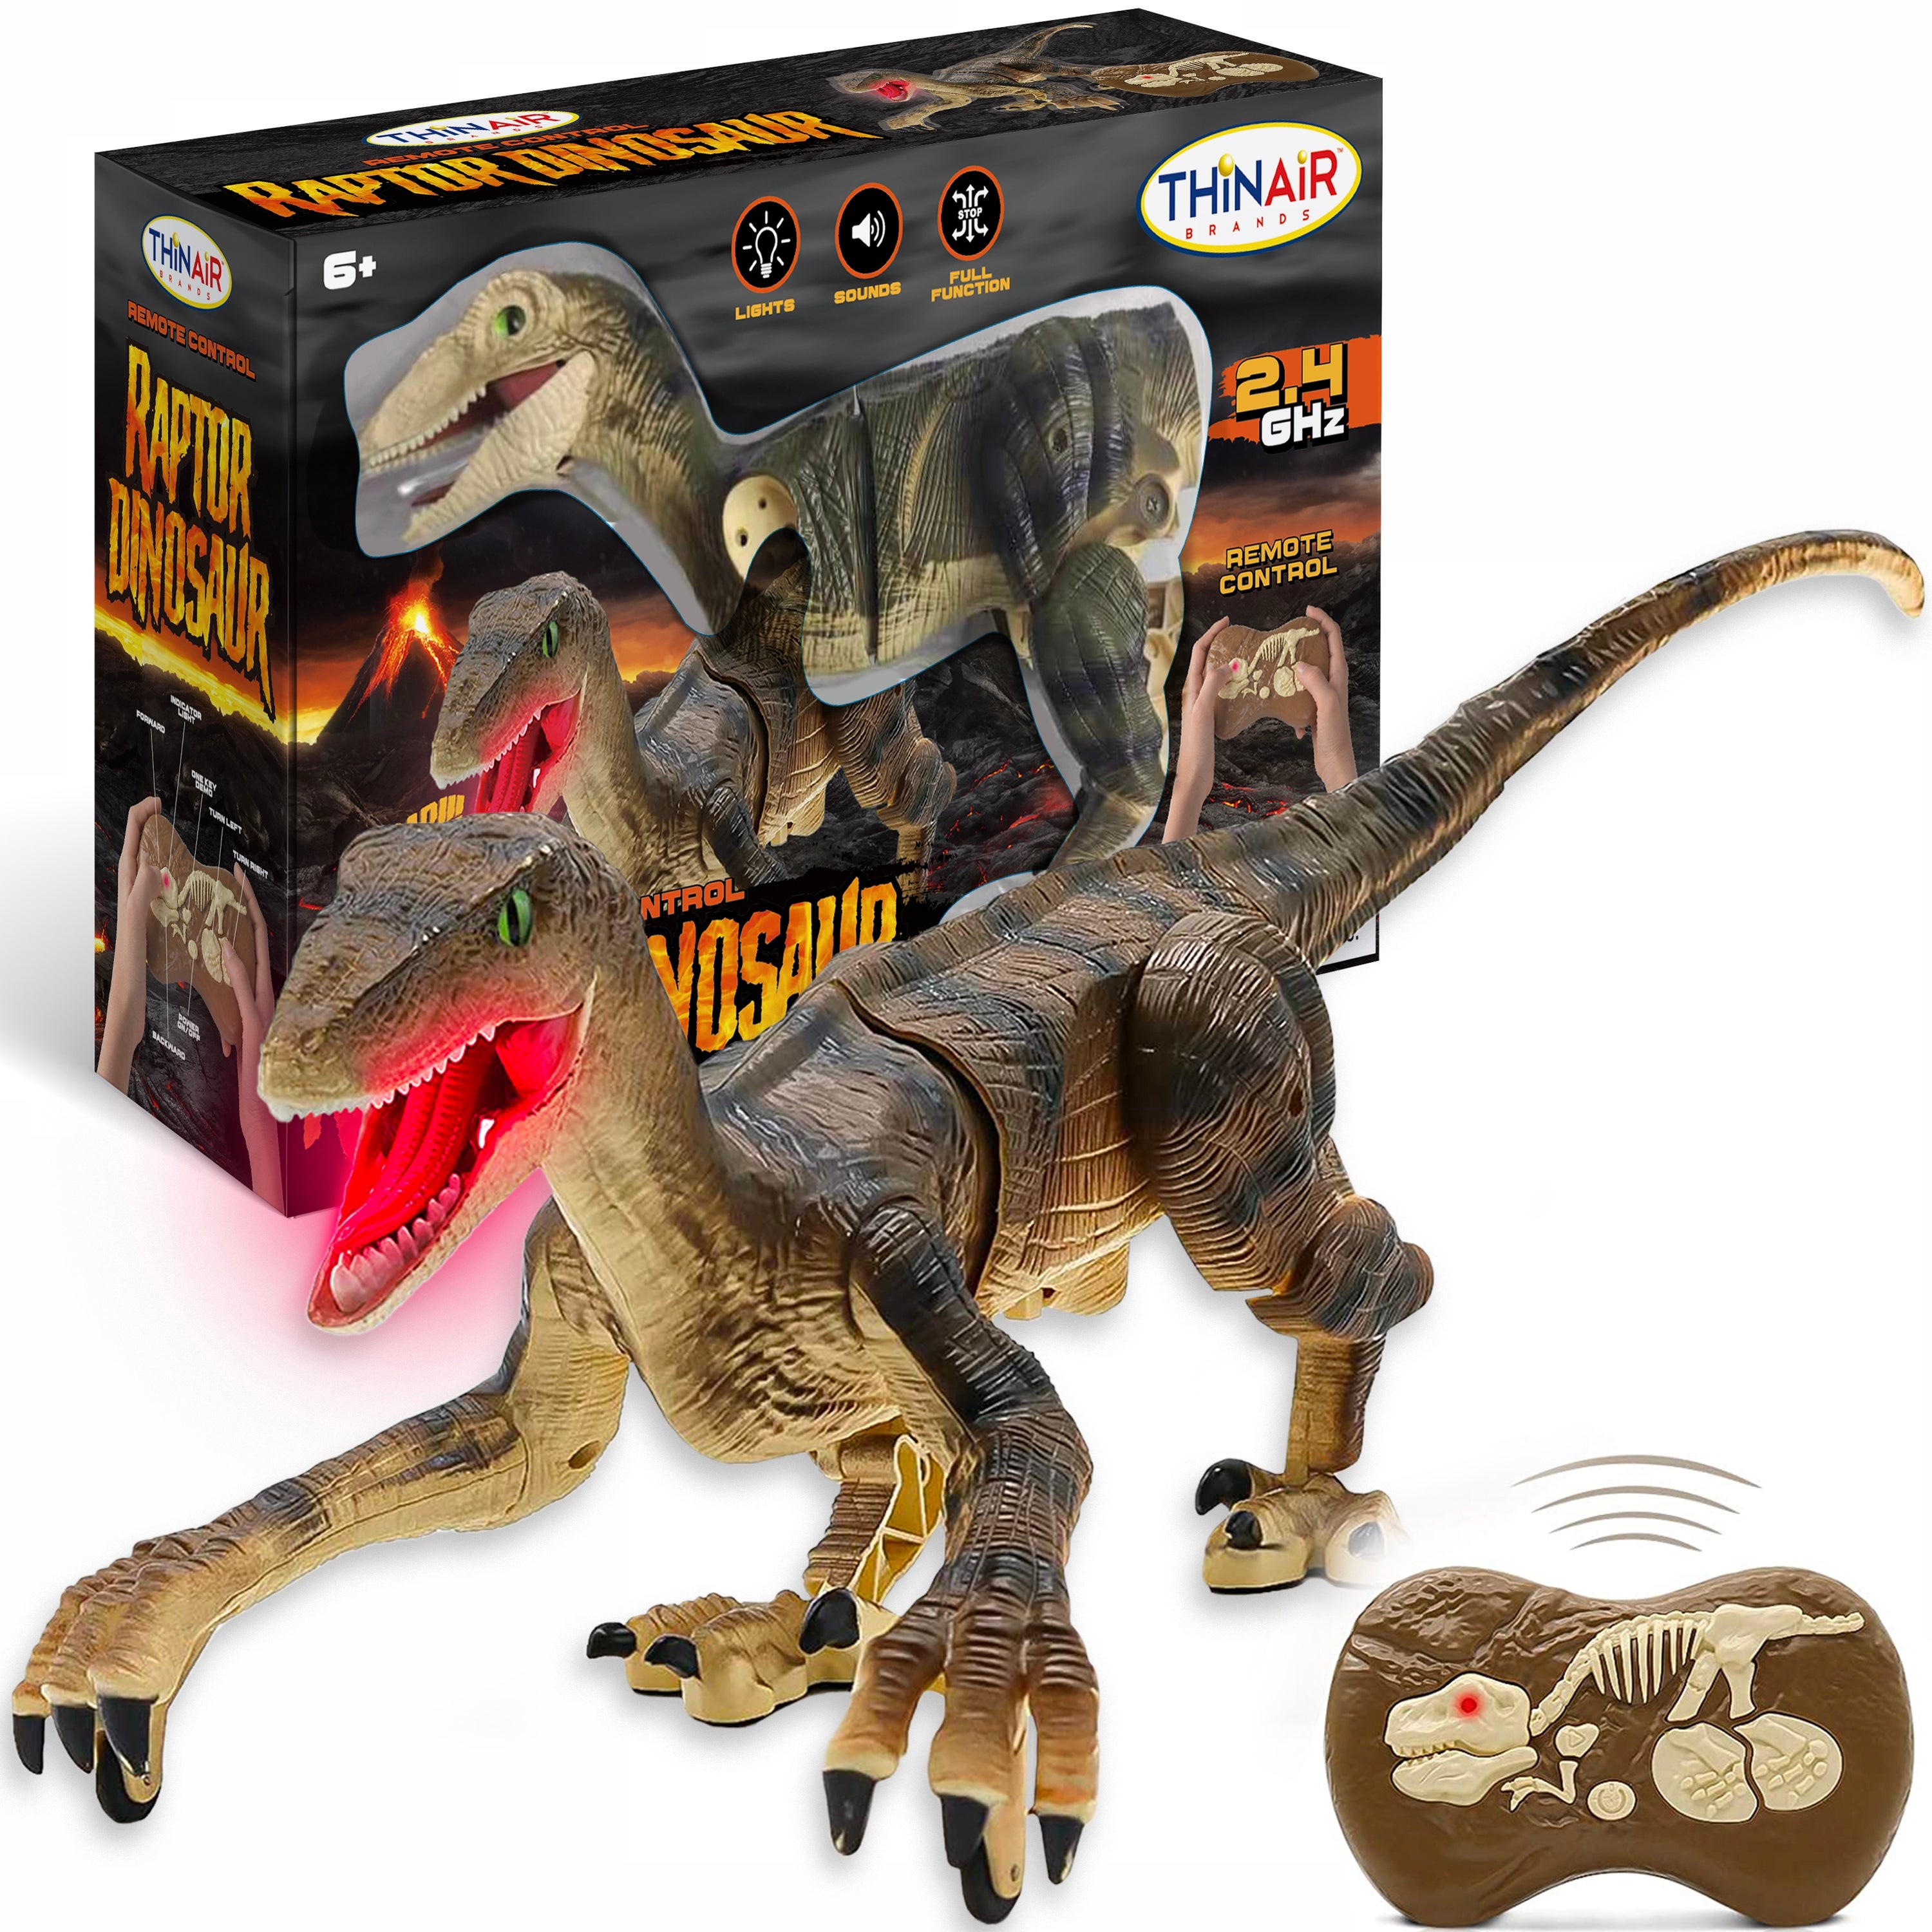 Remote Control Raptor Dinosaur Ages 6+ Years